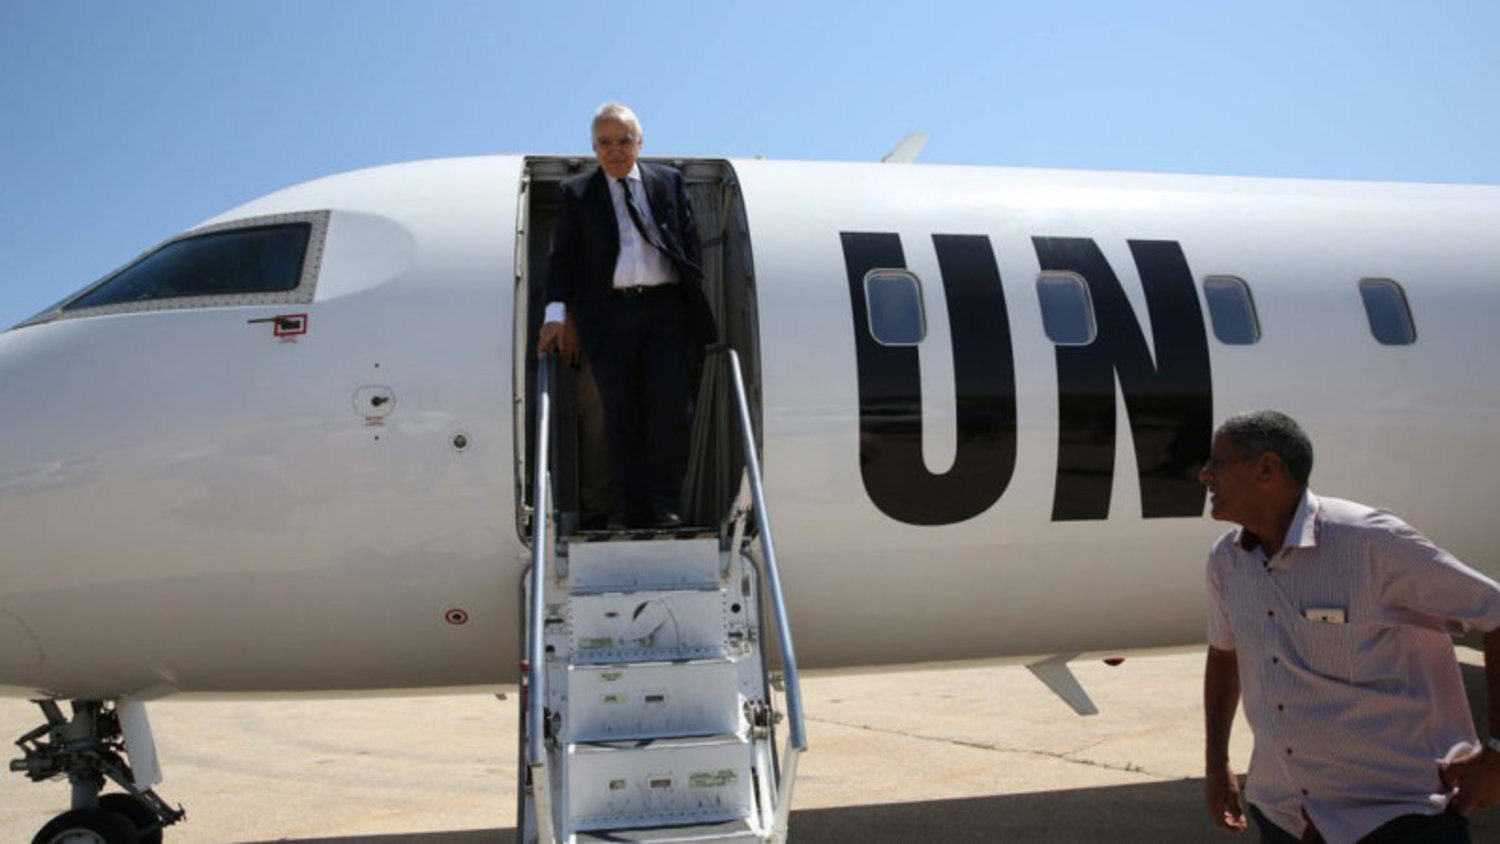 Ghassan Salamé, Special Representative of the Secretary-General (SRSG) and Head of the United Nations Support Mission in Libya disembarks from the UN plane in Al-Qubbah, 6 August, on his first trip to Libya since taking office.Source: UN
